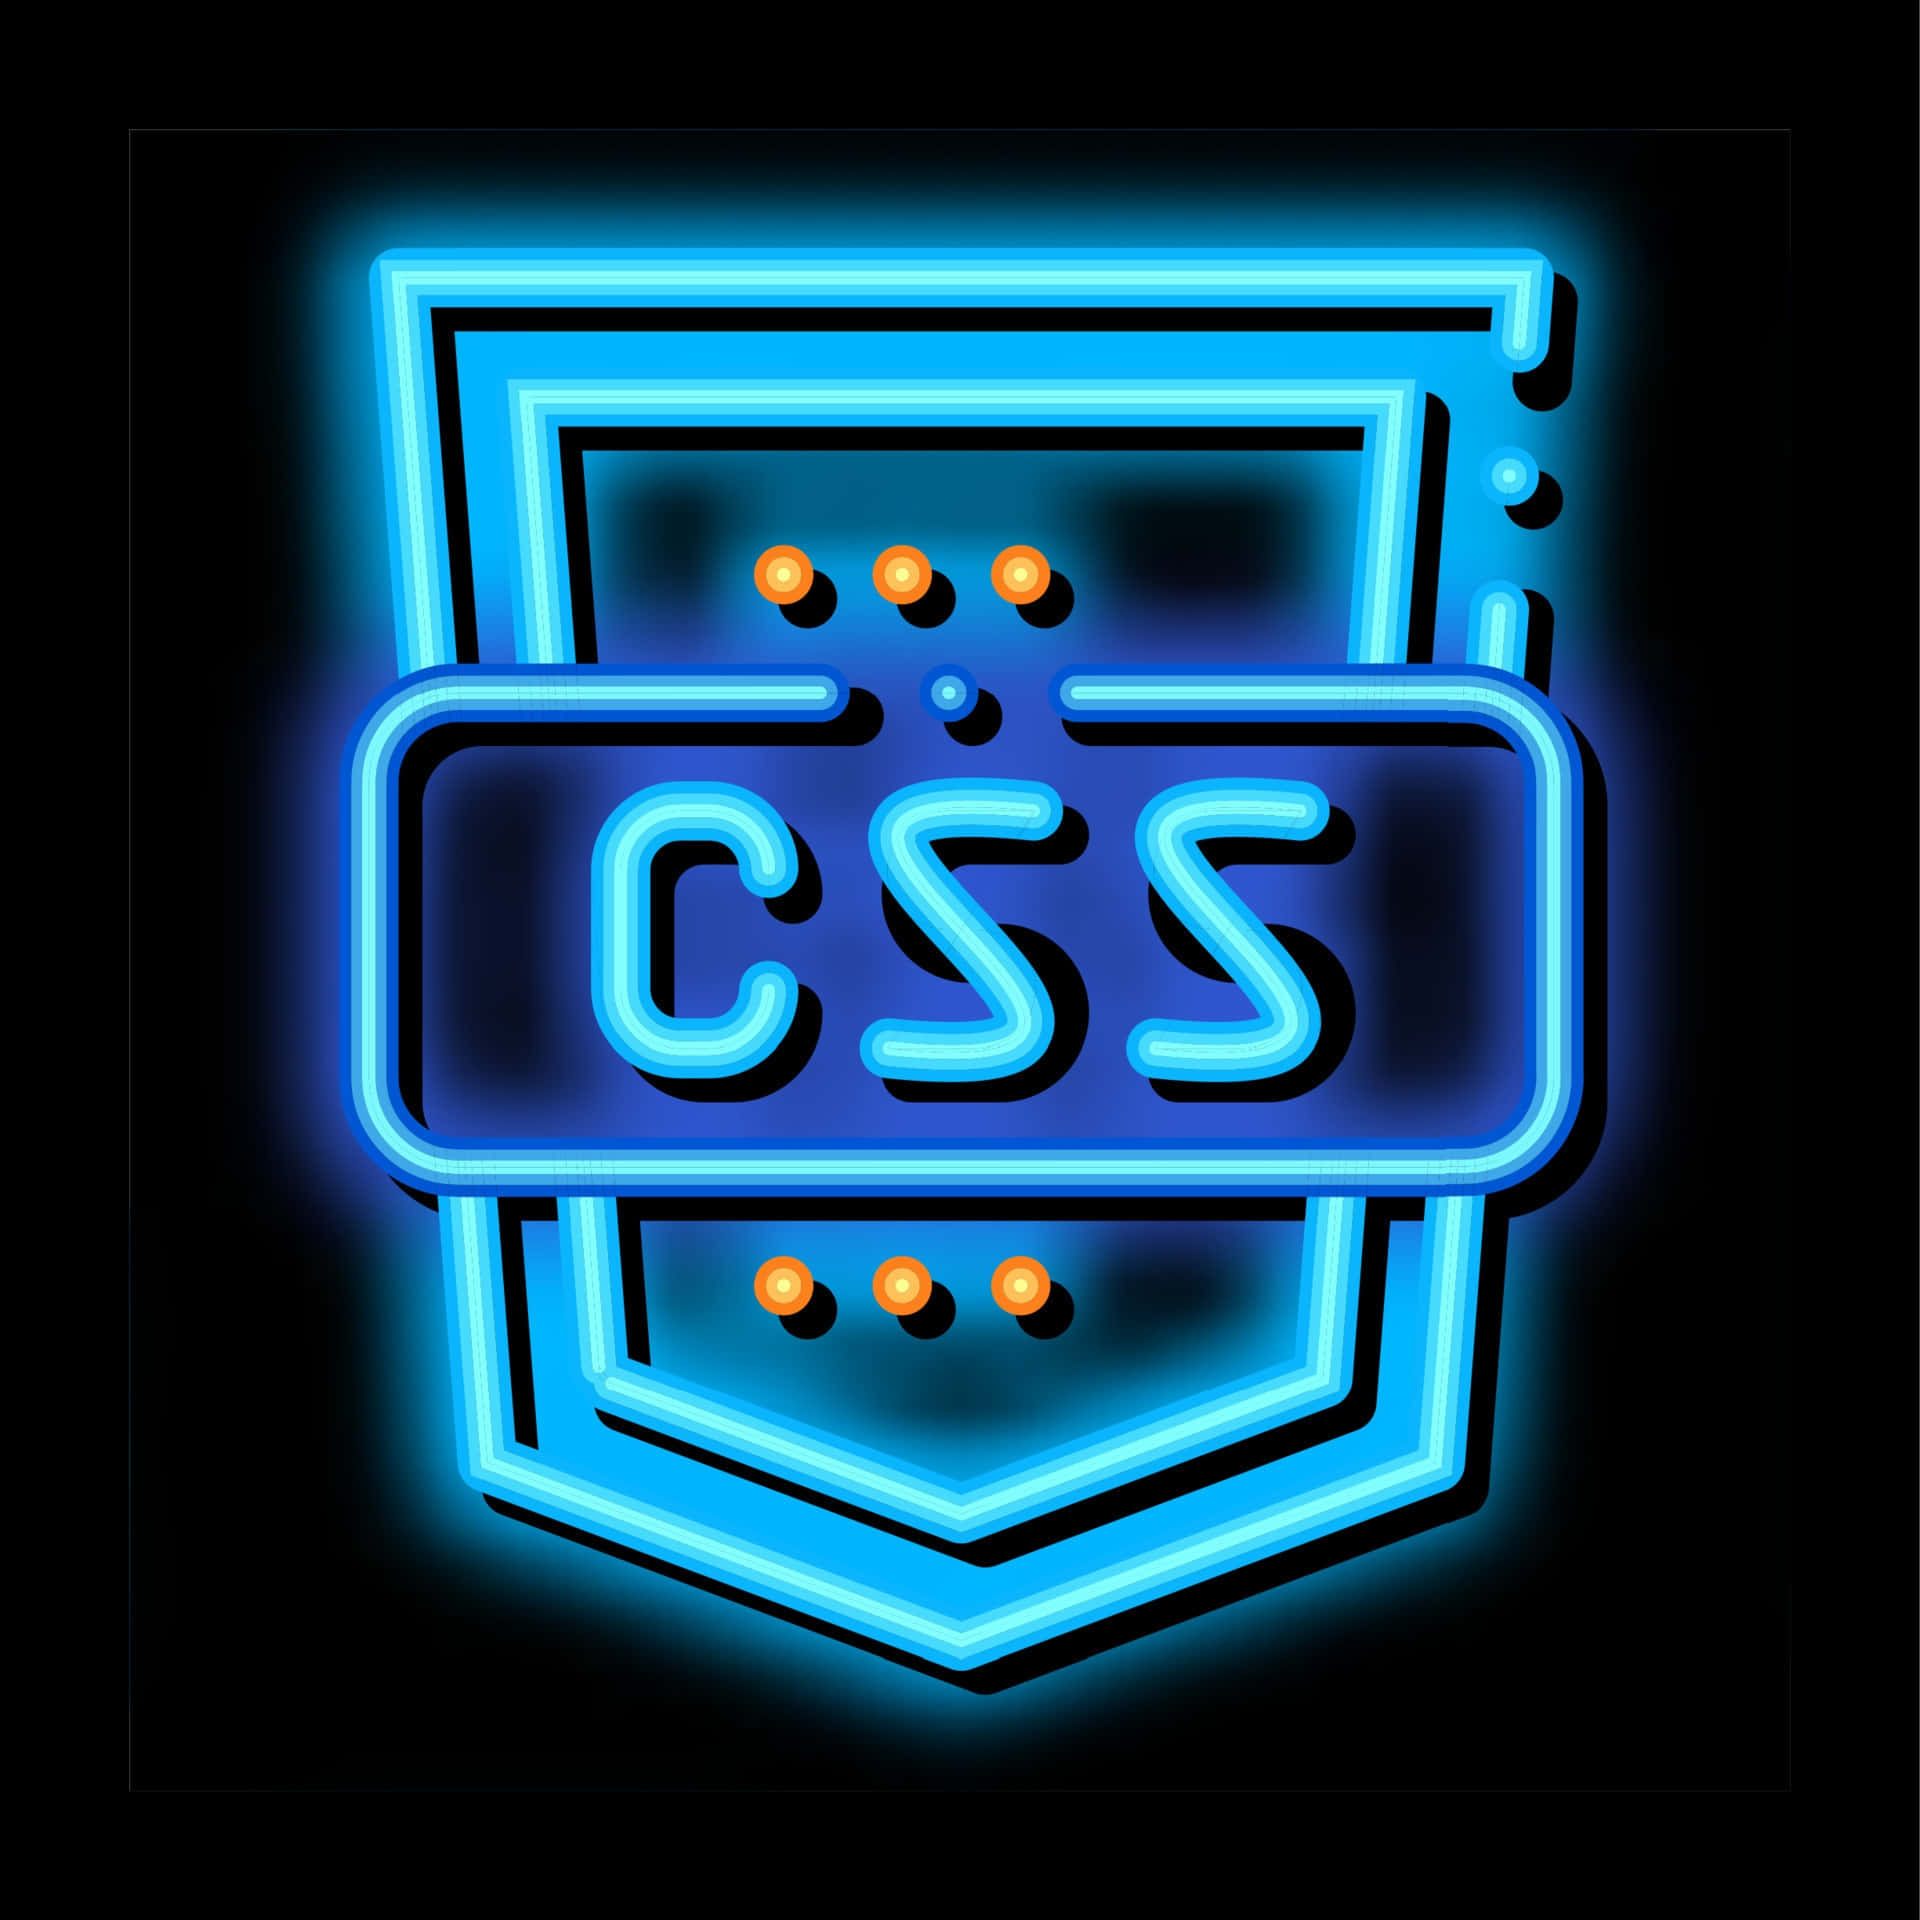 Electric Blue C S S Neon Sign Wallpaper